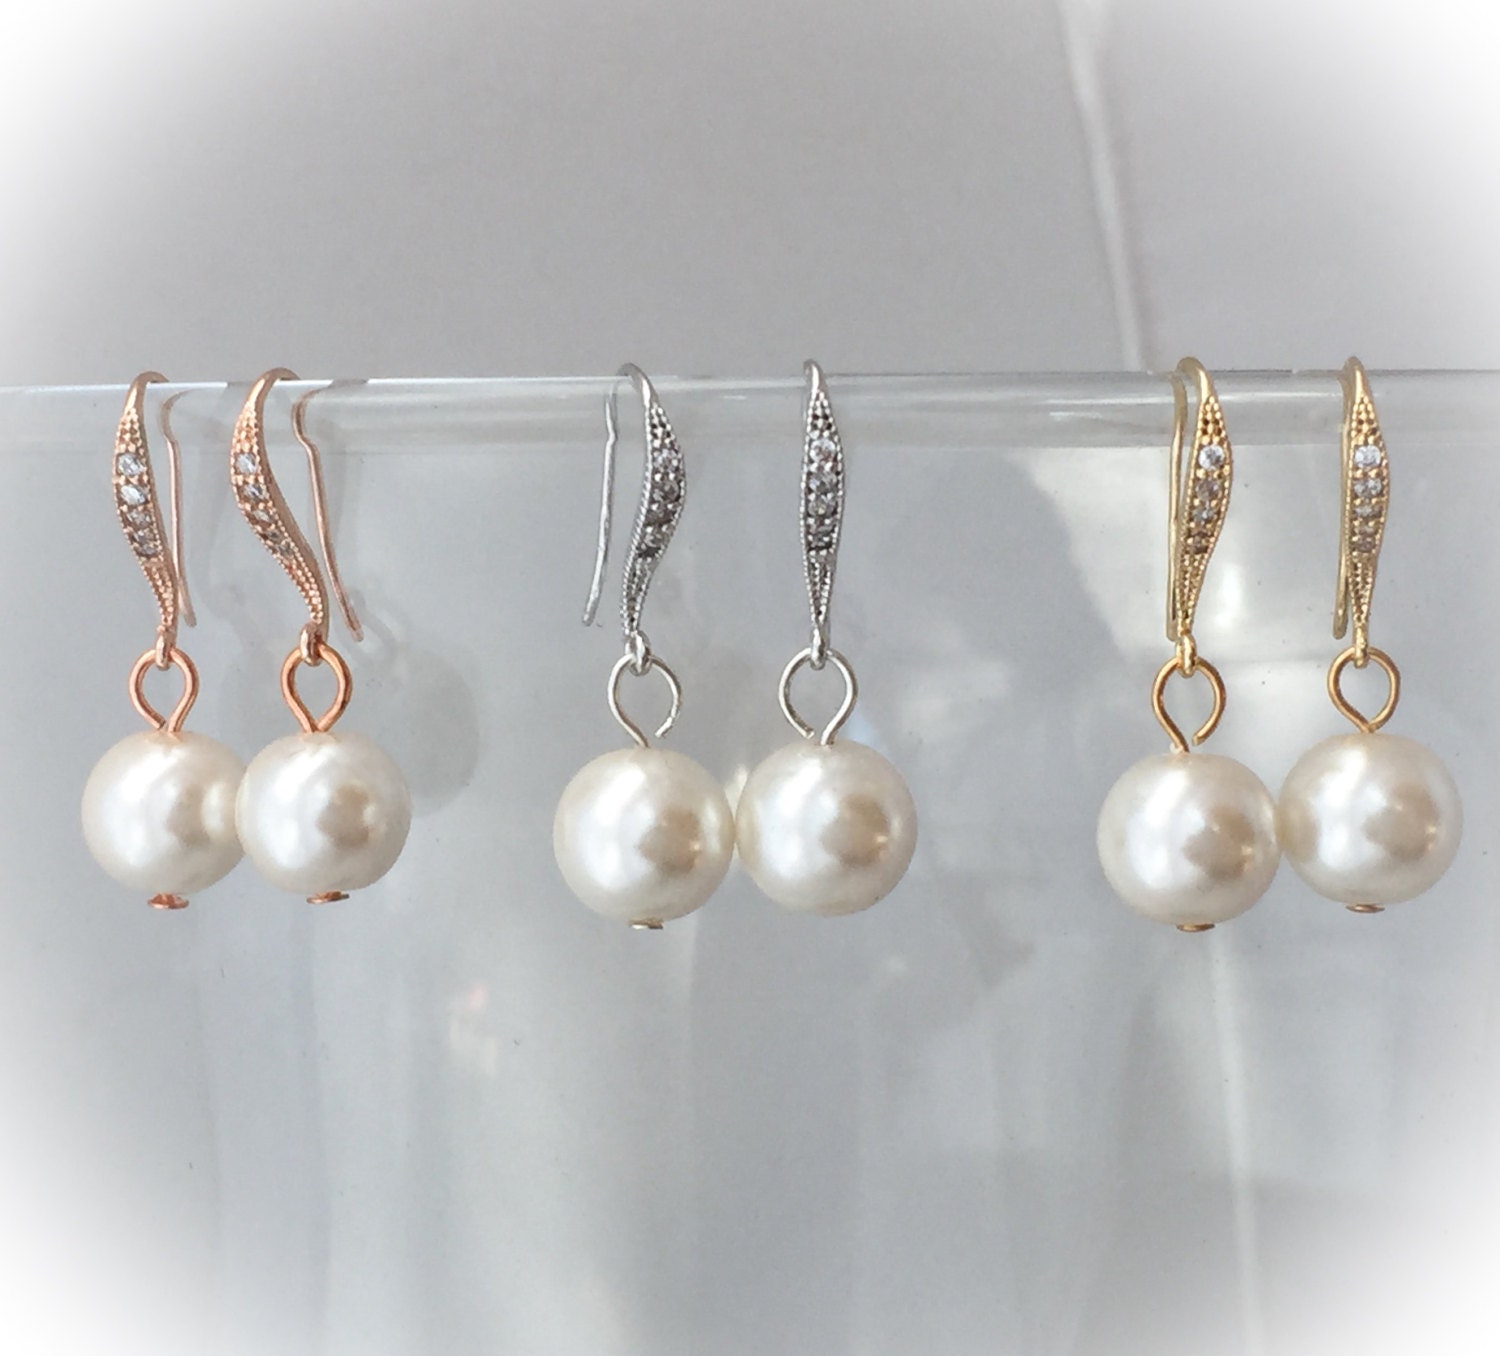 Rhinestone earrings with one drop pearl in gold, rose gold and silver